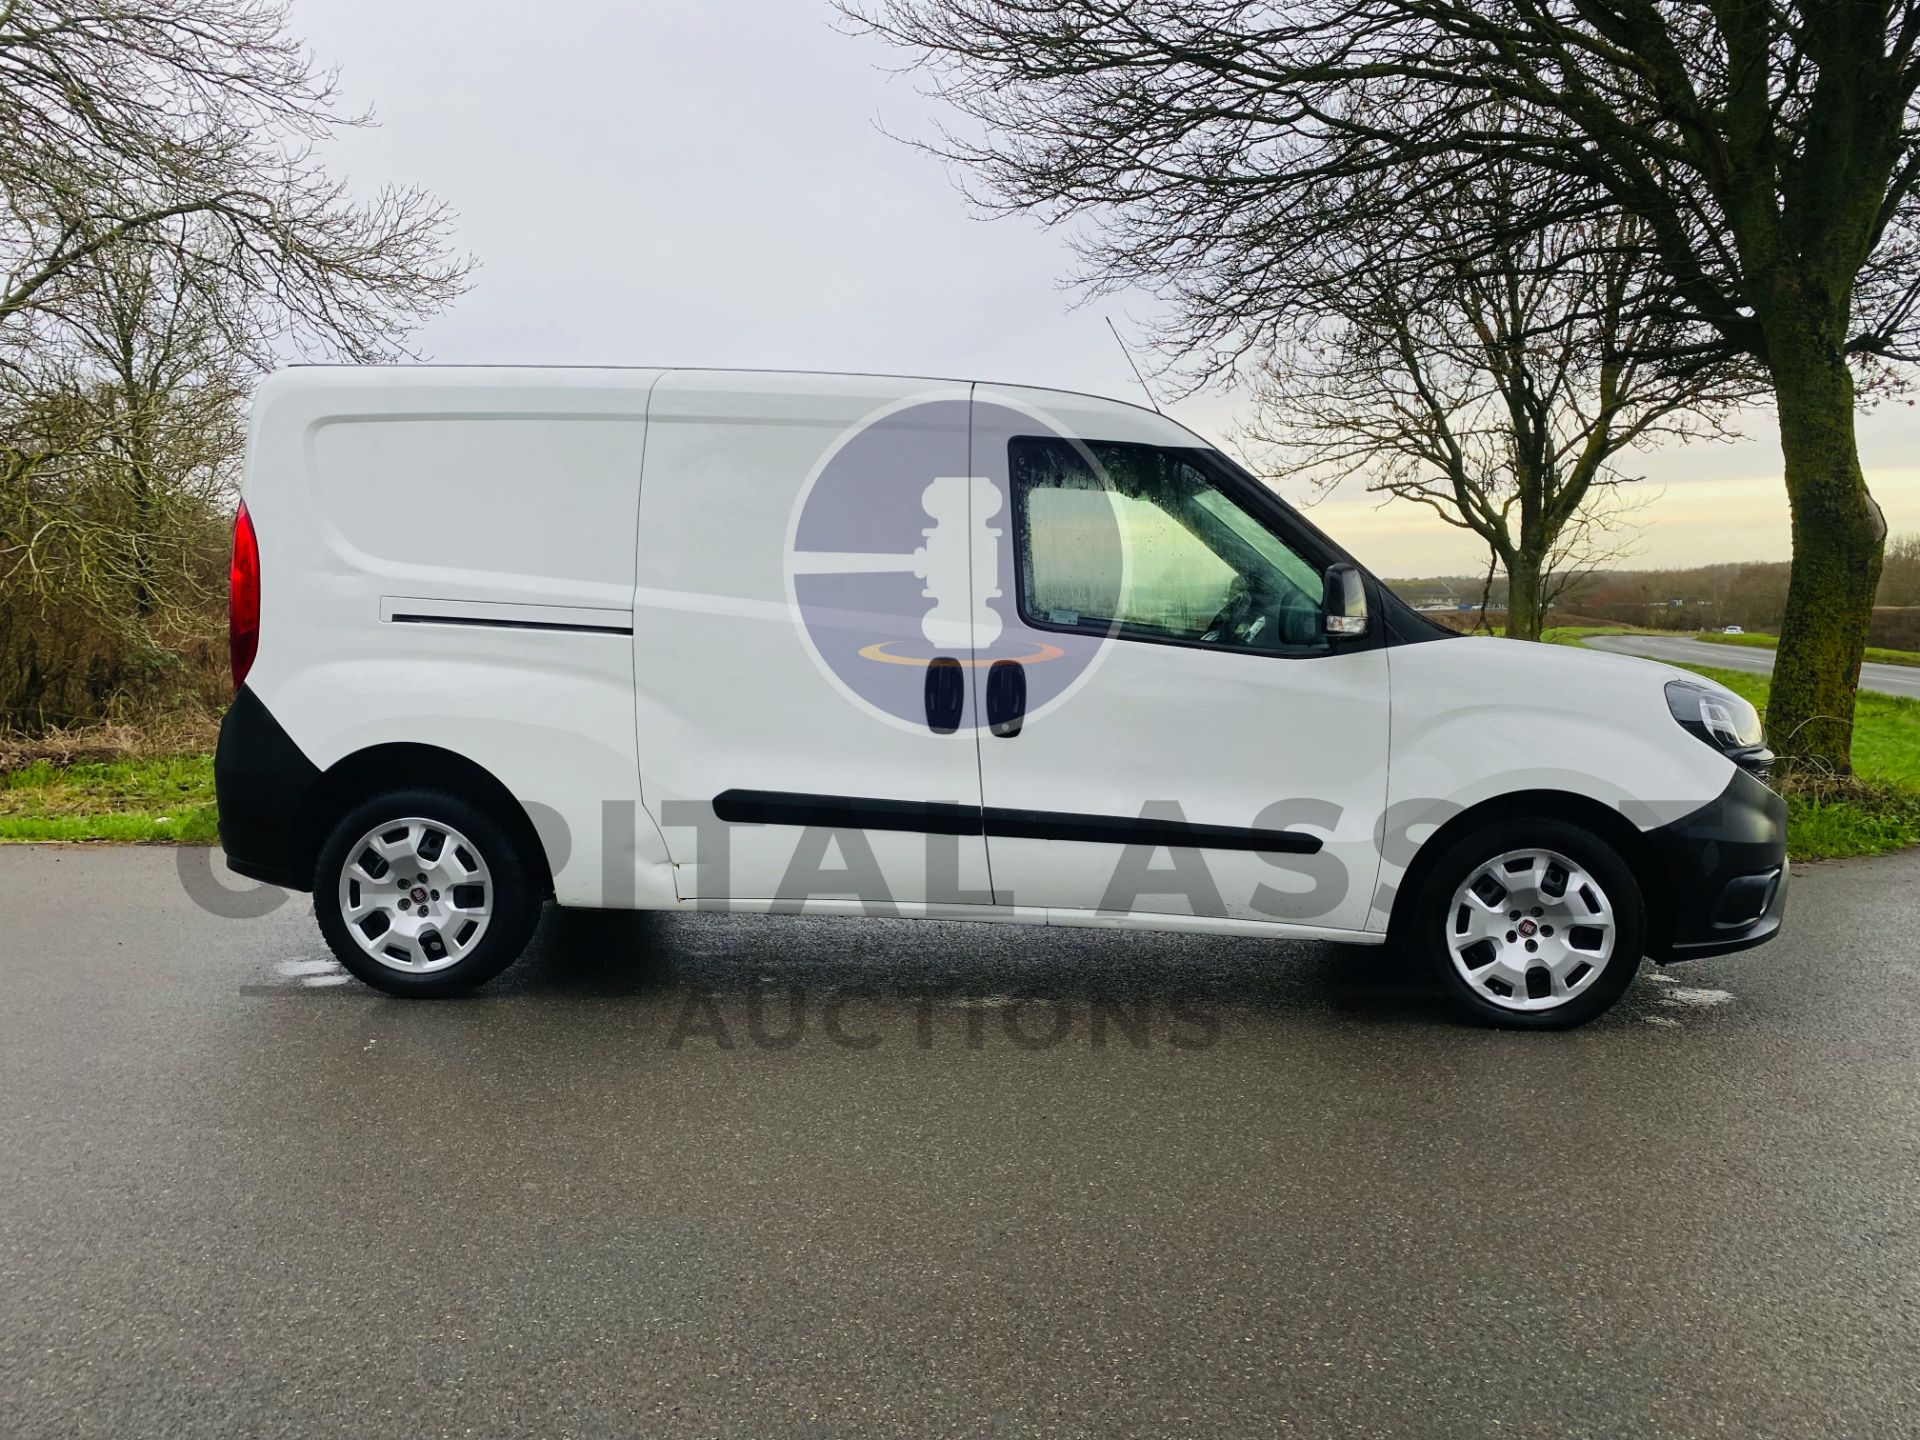 FIAT DOBLO 1.6 MULTIJET LWB "EURO 6" AIR CON - ONLY 46793 MILES! - 19 REG - (NEW SHAPE) - - Image 10 of 23